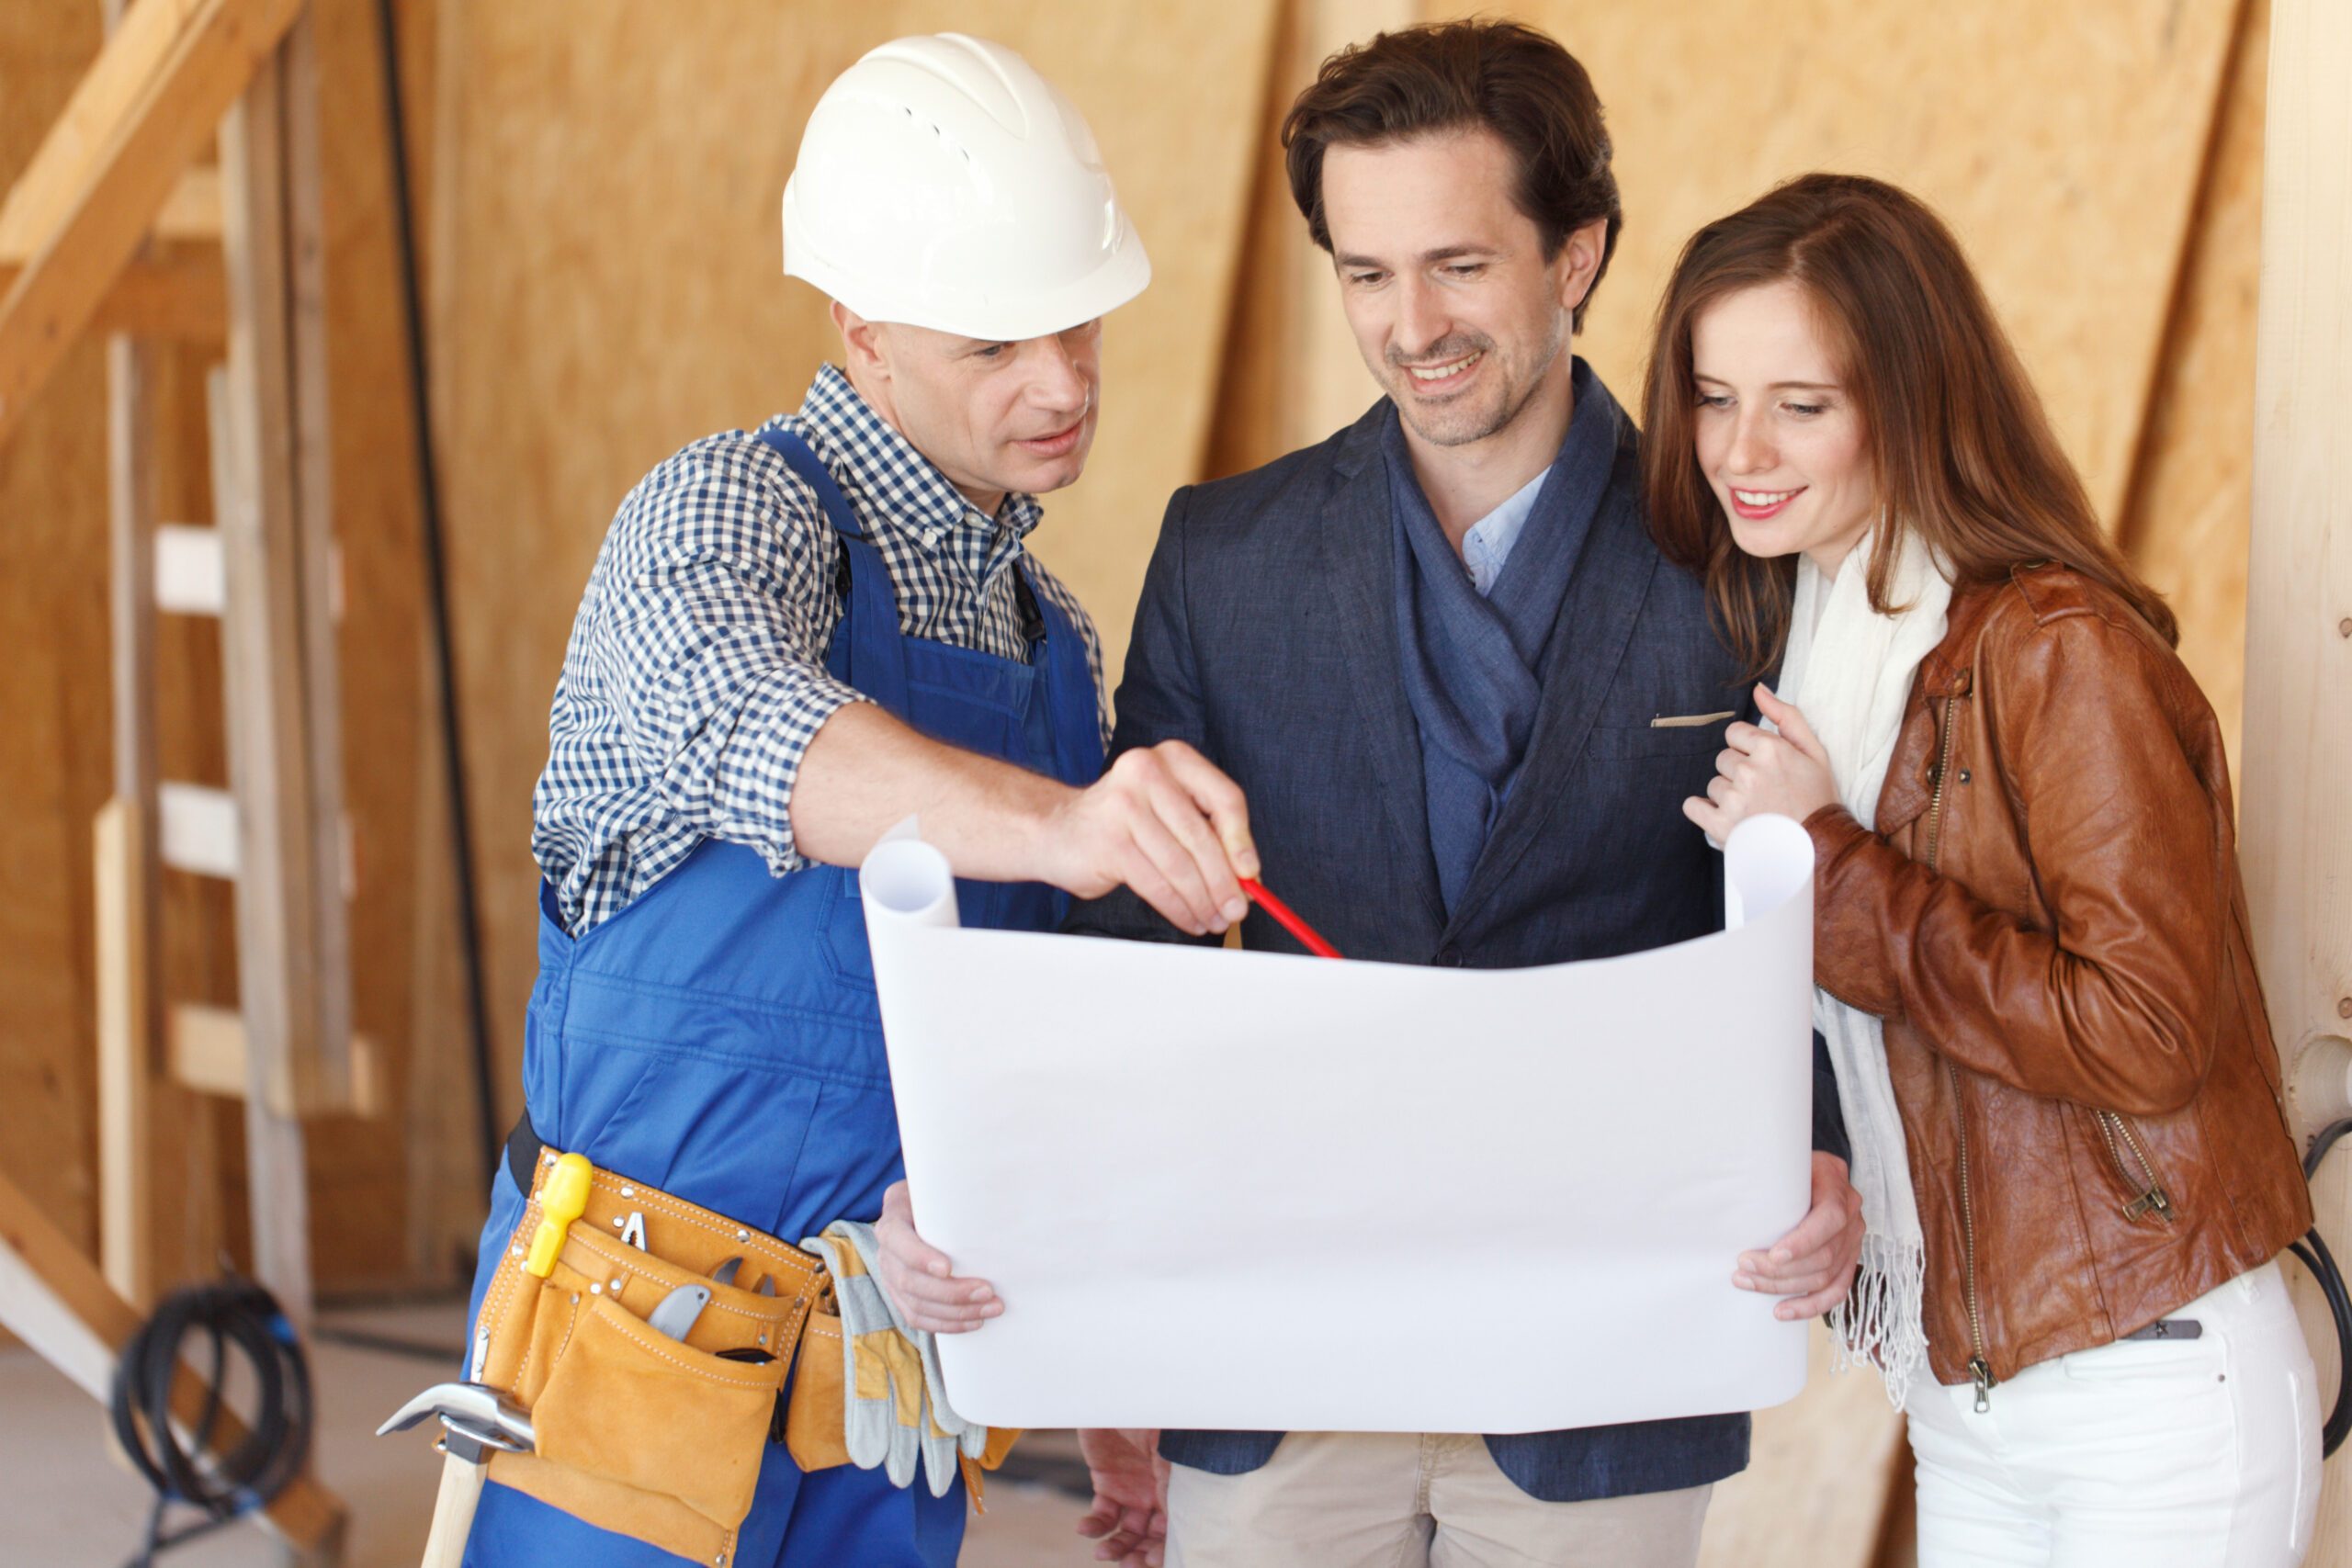 Five Factors to Consider When Choosing a Home Builder